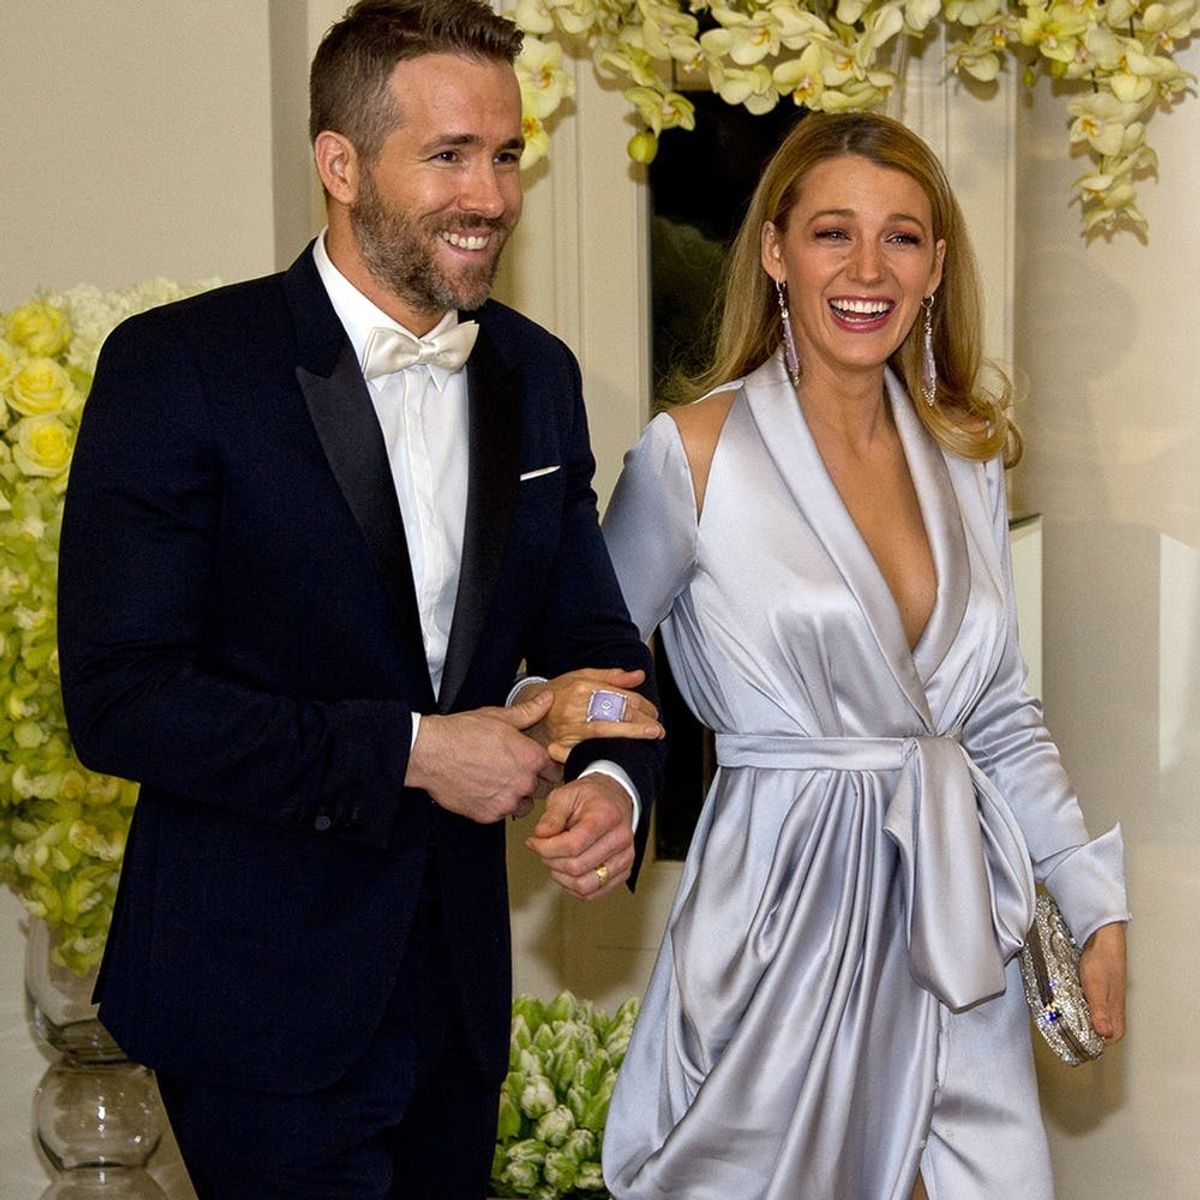 This MTV Movie Awards Moment Is Proof That Ryan Reynolds + Blake Lively Are the Funniest Celeb Couple